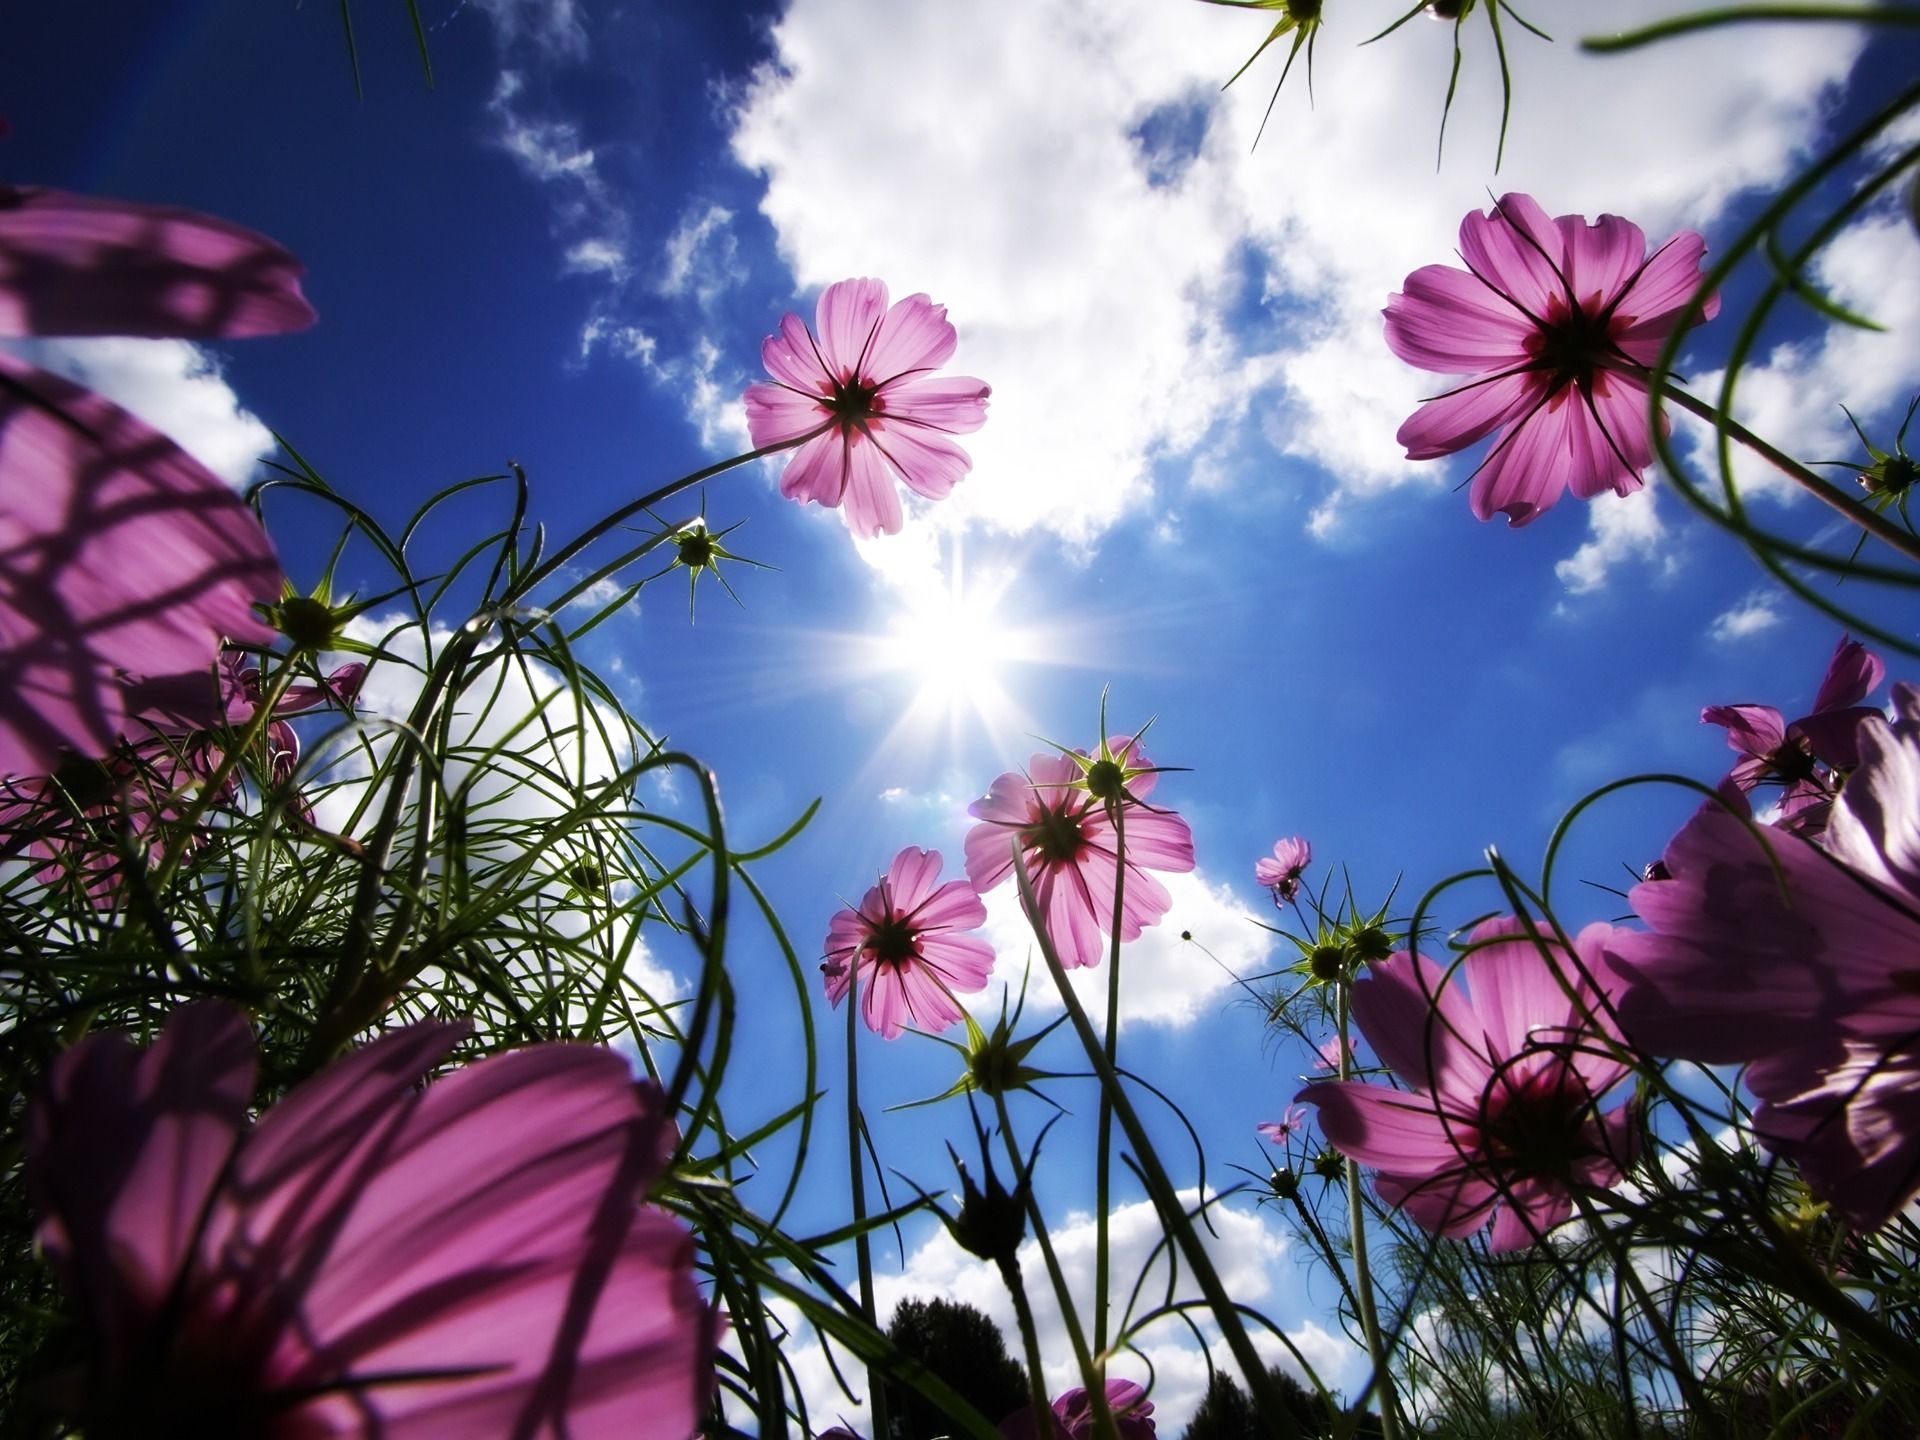 Sunny Flowers Wallpaper Flowers Nature Wallpaper in jpg format for free download